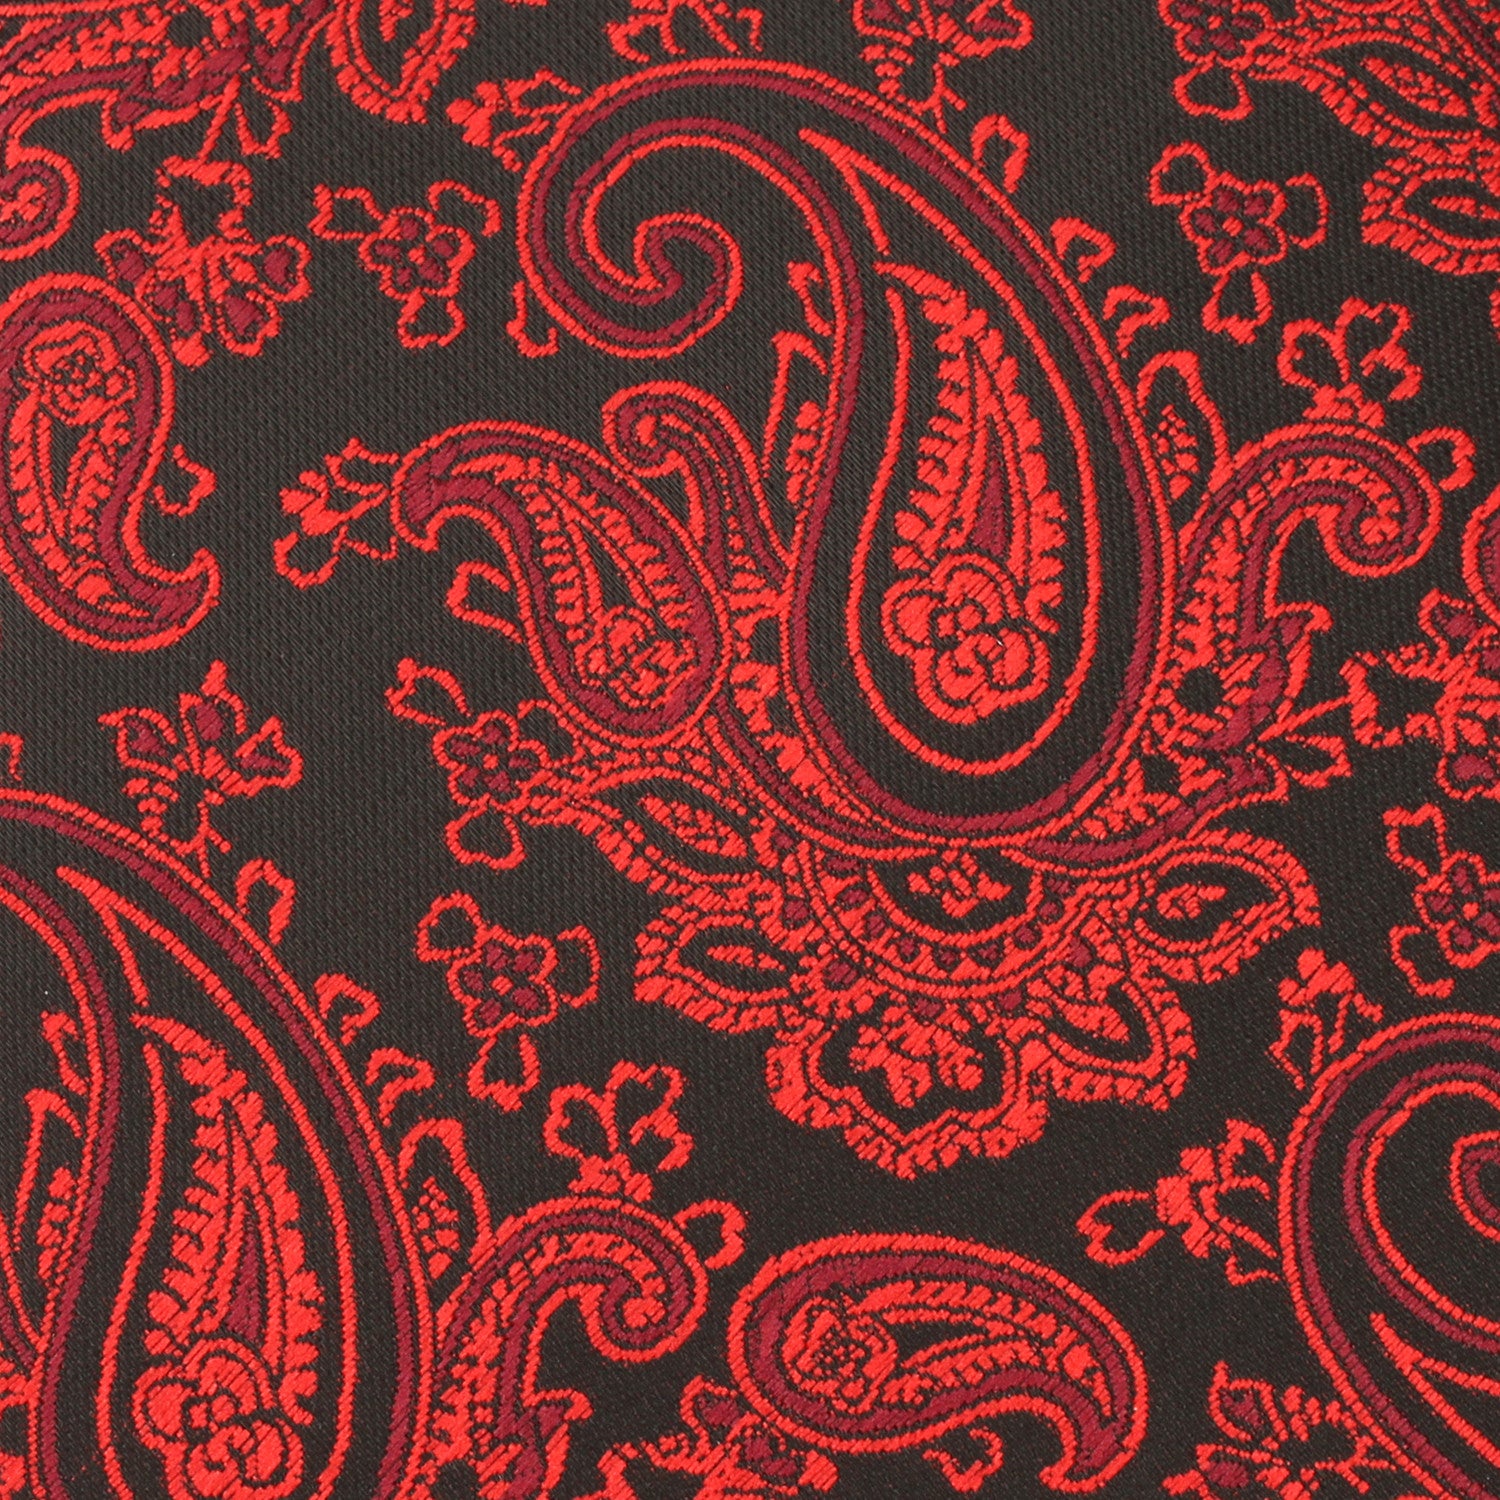 Paisley Red and Black Tie Fabric